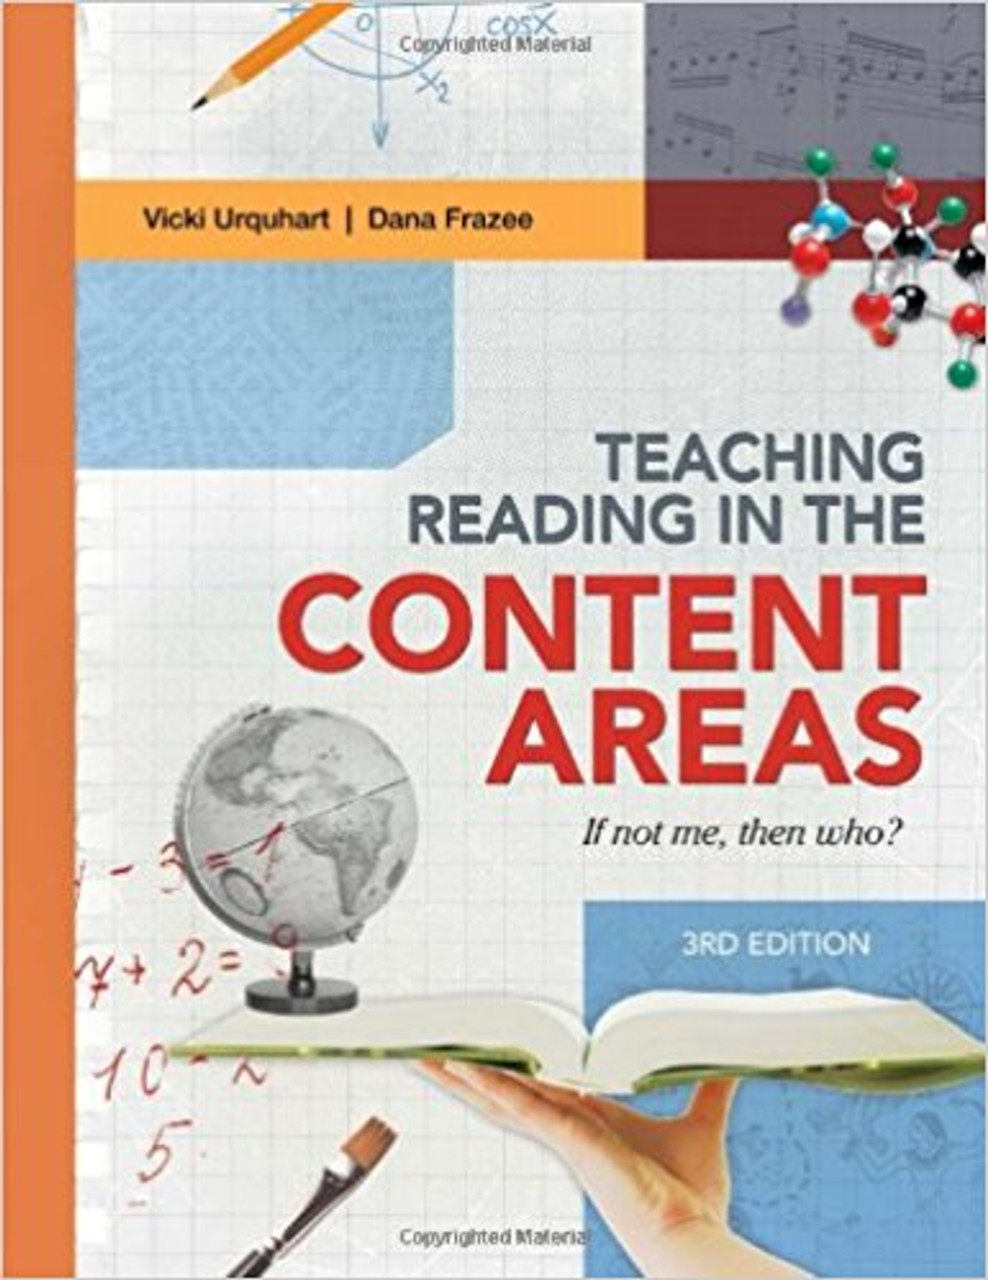 This 3rd edition draws from new research on the impact of new technologies, the population boom of English language learners, and the influence of the Common Core State Standards. You'll learn which instructional strategies best support reading in specific subjects and how you can optimize your classroom for reading, writing, and discussion.